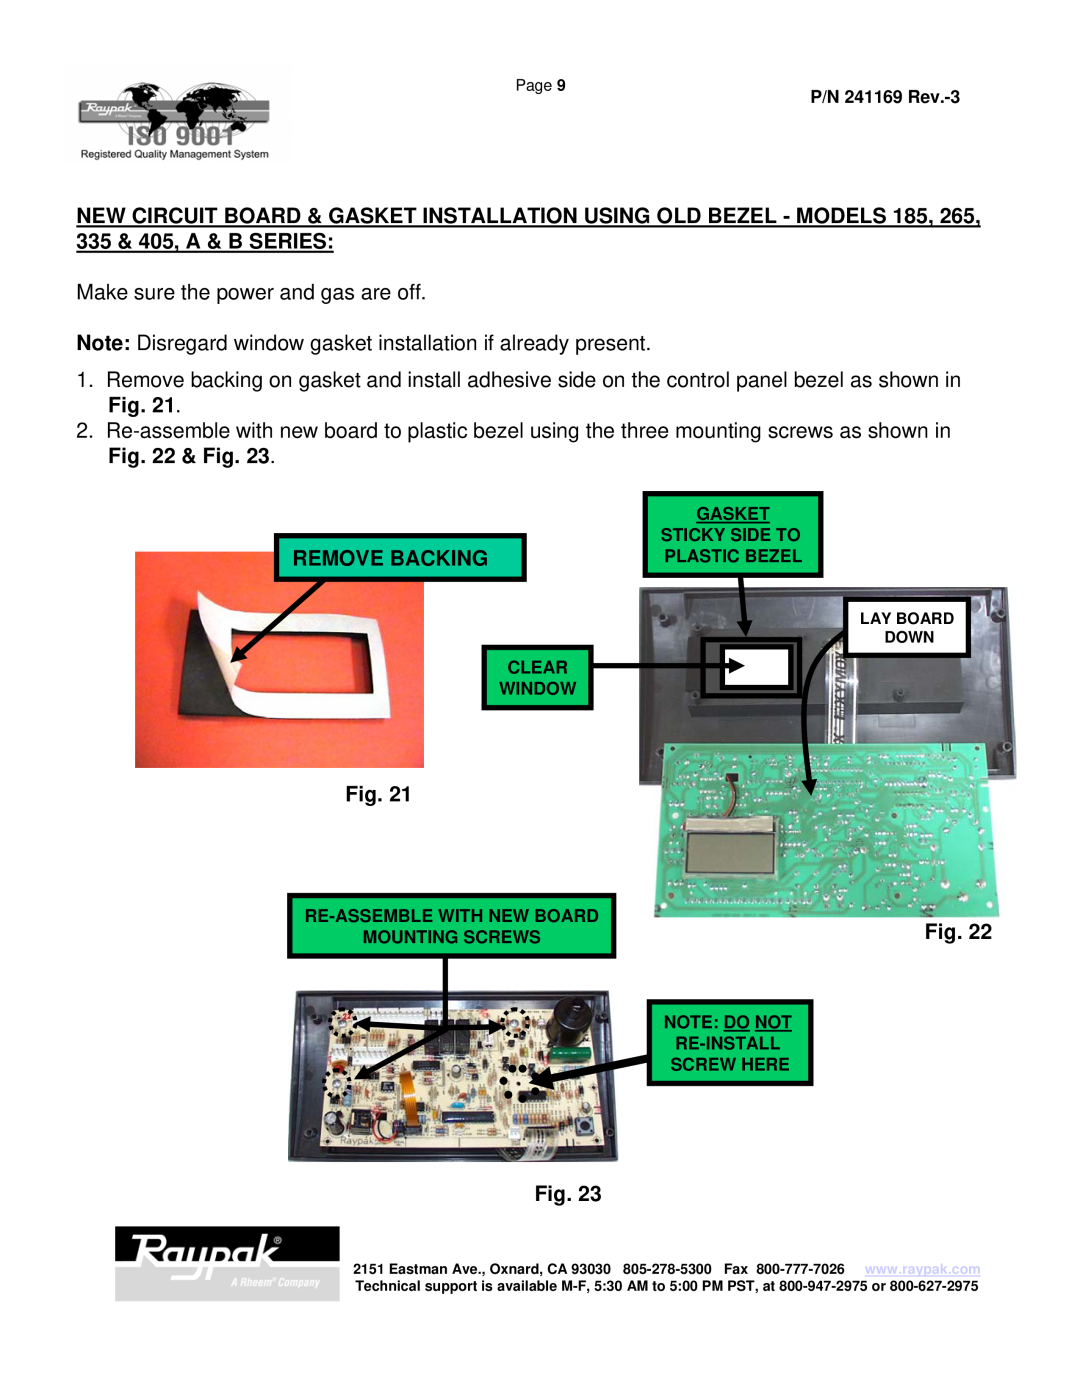 Raypak 185A NEW CIRCUIT BOARD & GASKET INSTALLATION USING OLD BEZEL - MODELS 185, 335 & 405, A & B SERIES, Remove Backing 